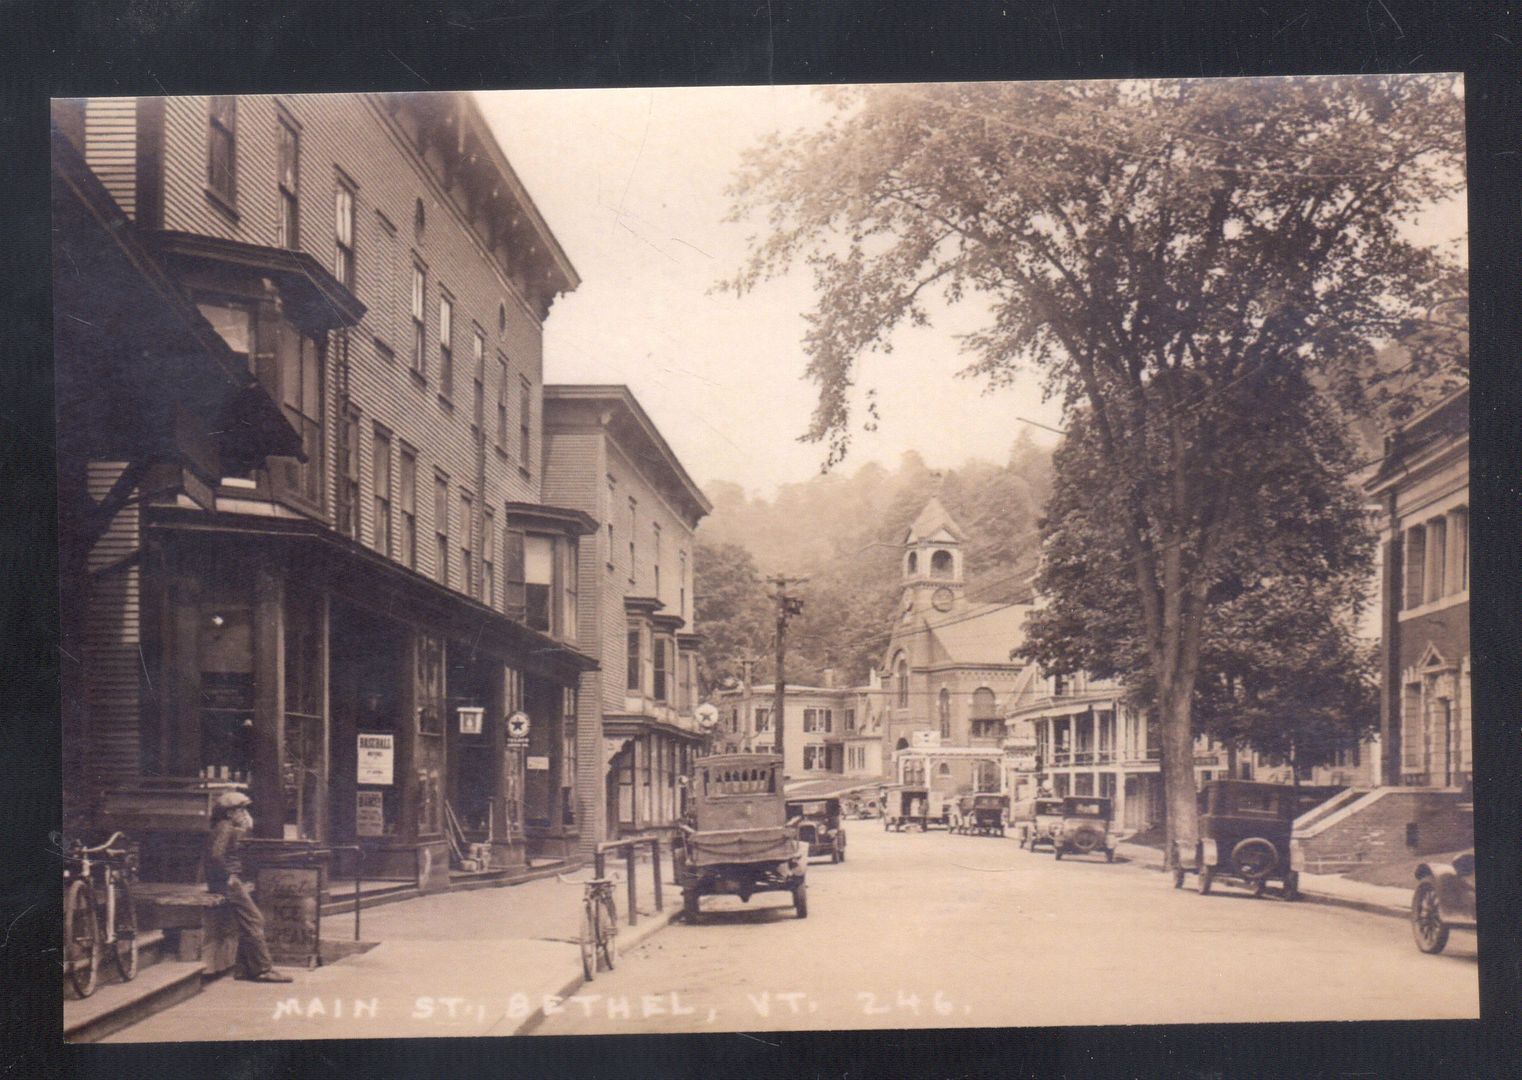 REAL PHOTO BETHEL VERMONT VT. DOWNTOWN STREET SCENE OLD CARS POSTCARD COPY